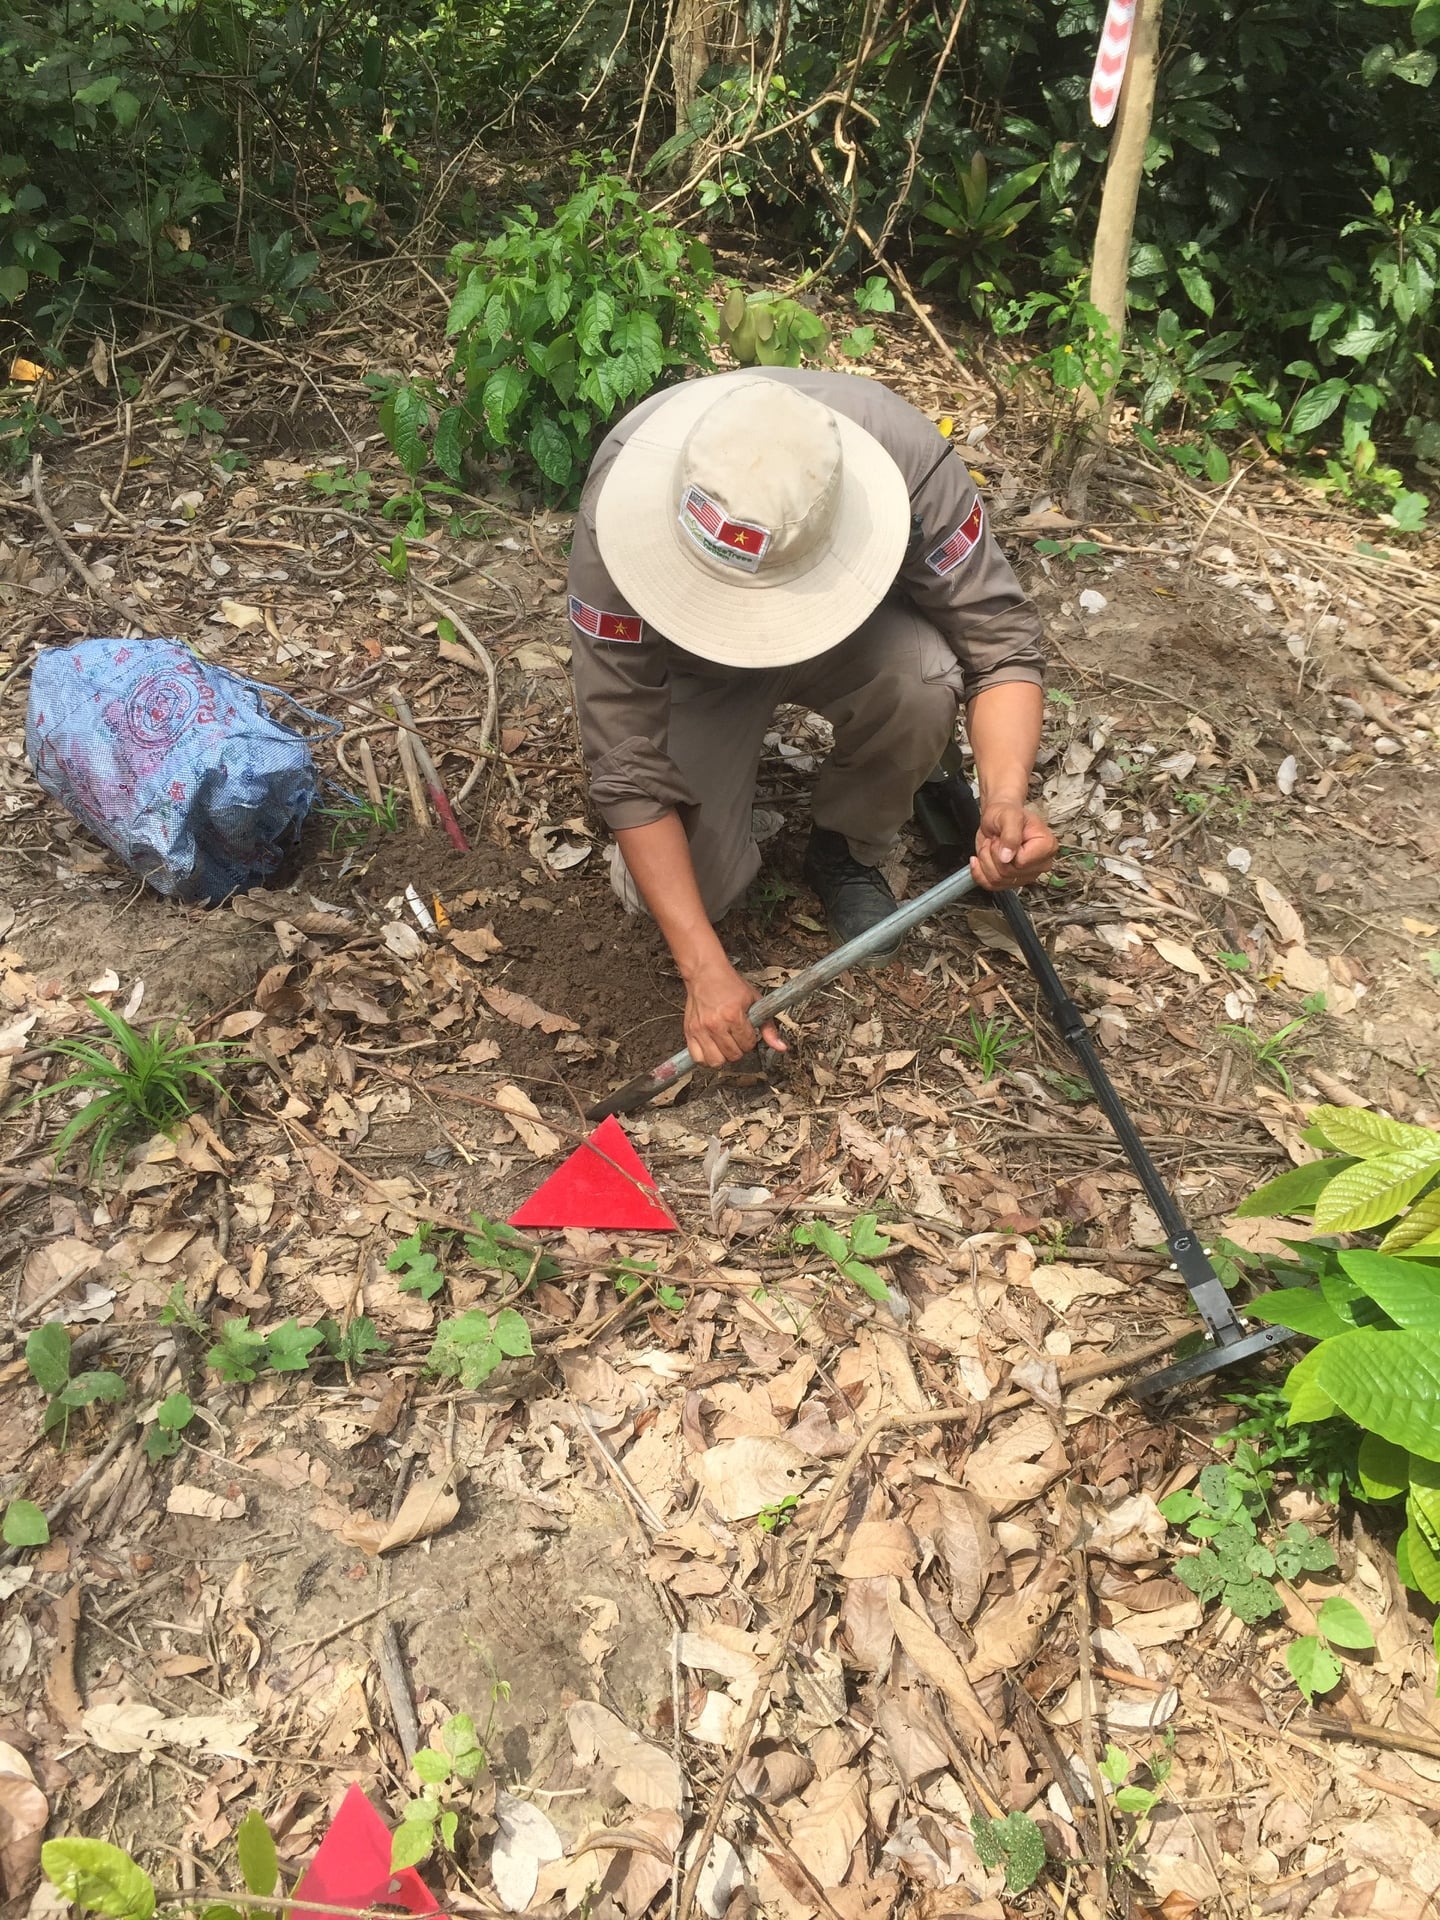 Foreign-funded projects help Vietnam deal with unexploded ordnance